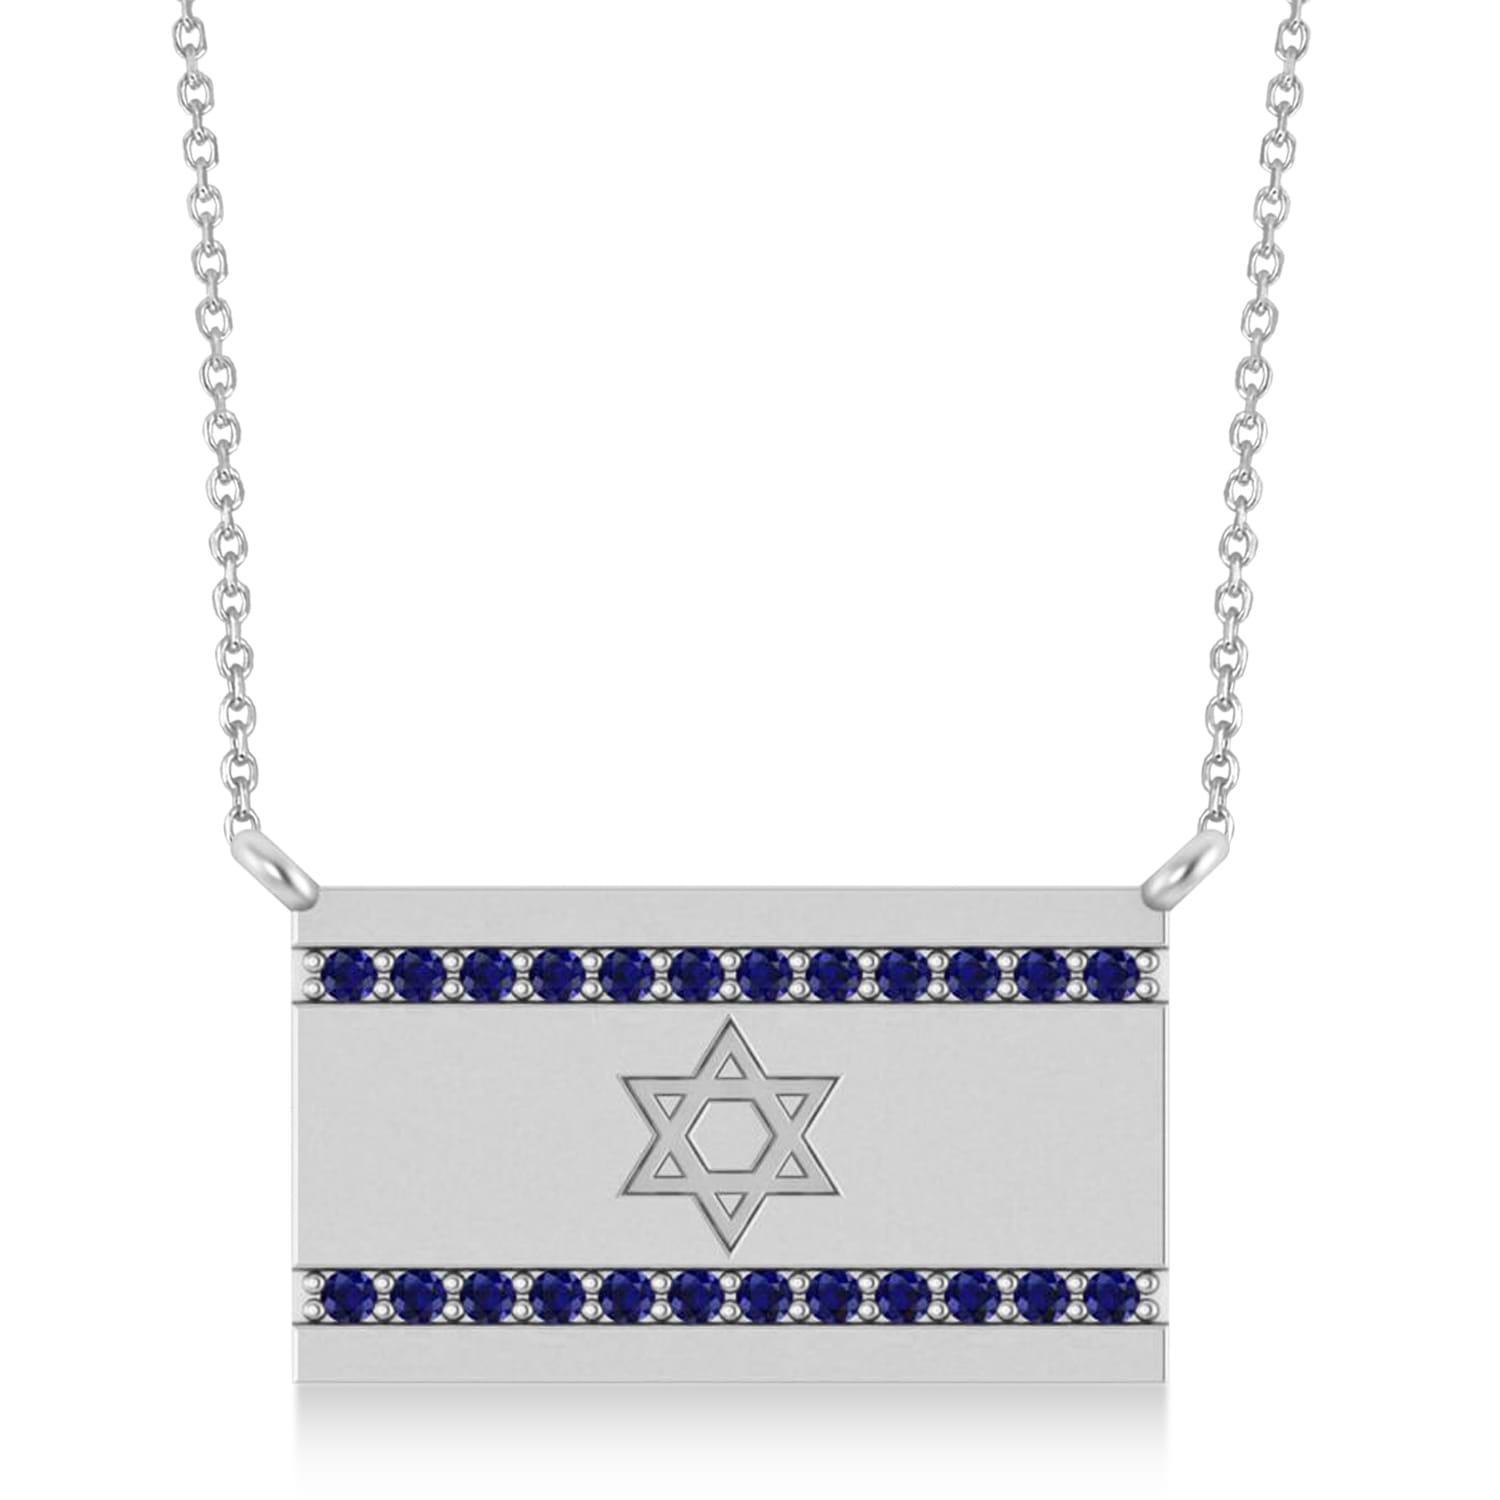 Israeli Flag Necklace in 14K White Gold with Diamonds and Blue